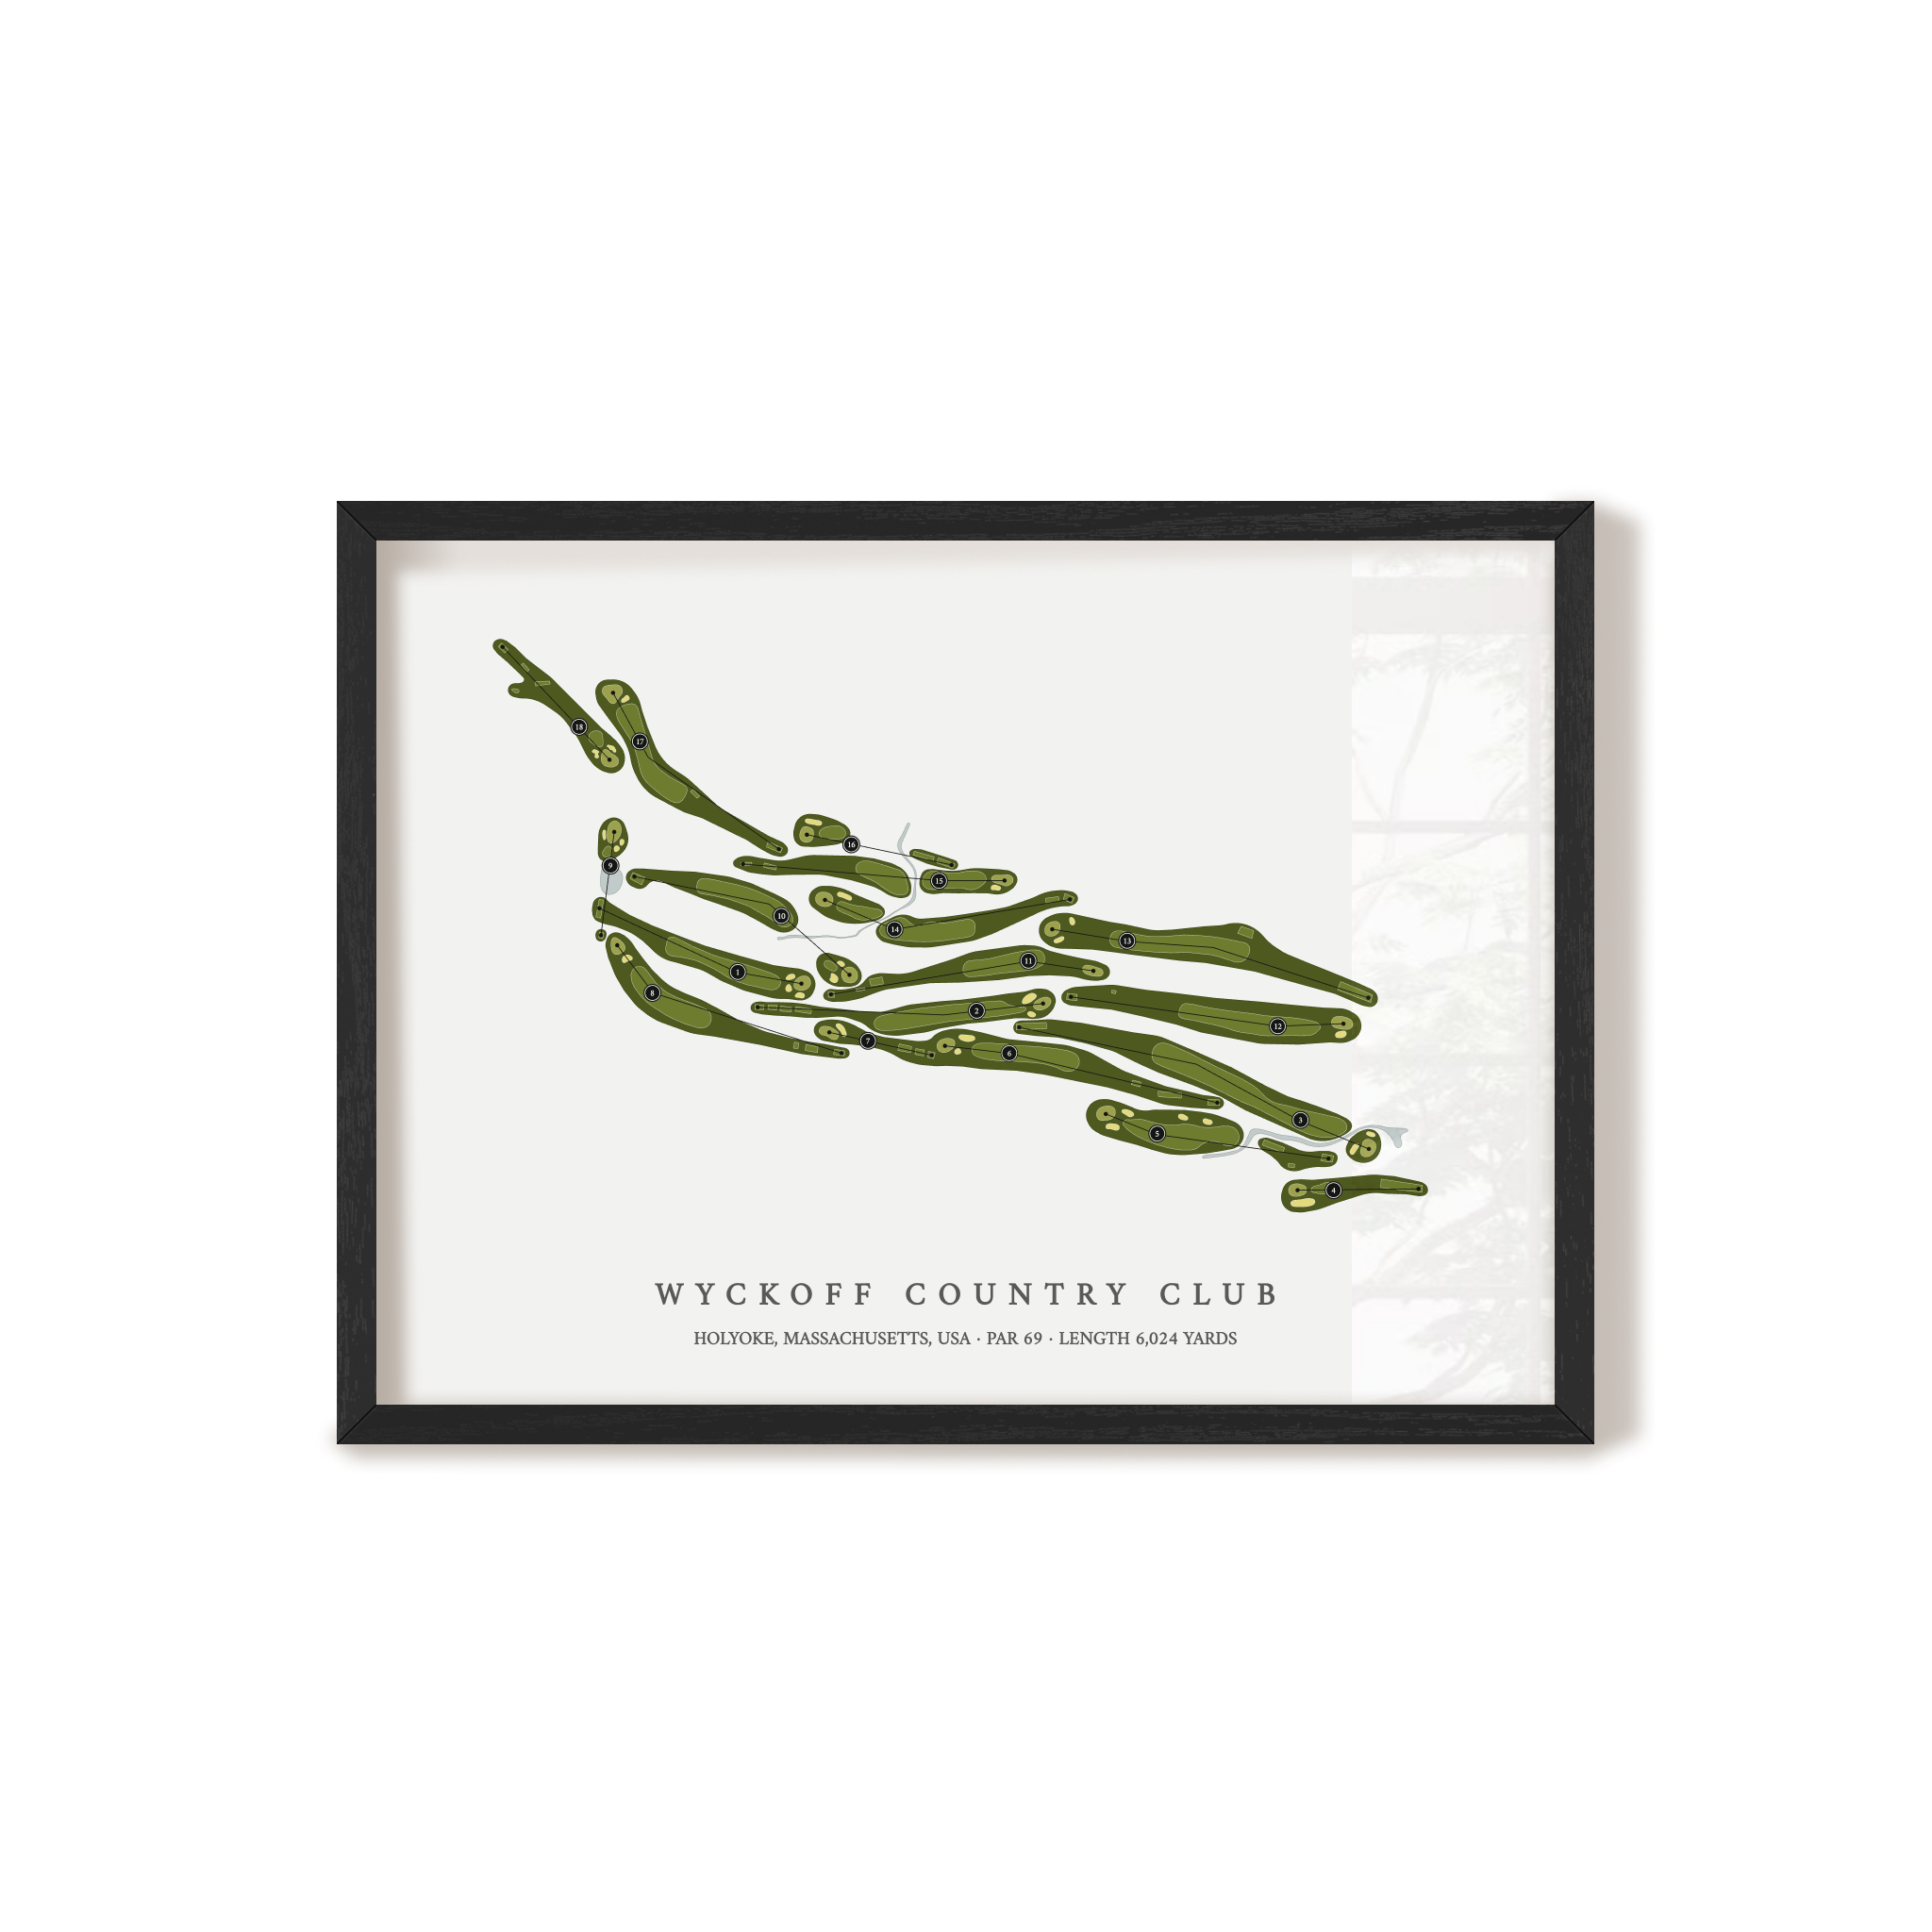 Wyckoff Country Club | Golf Course Map | Black Frame 